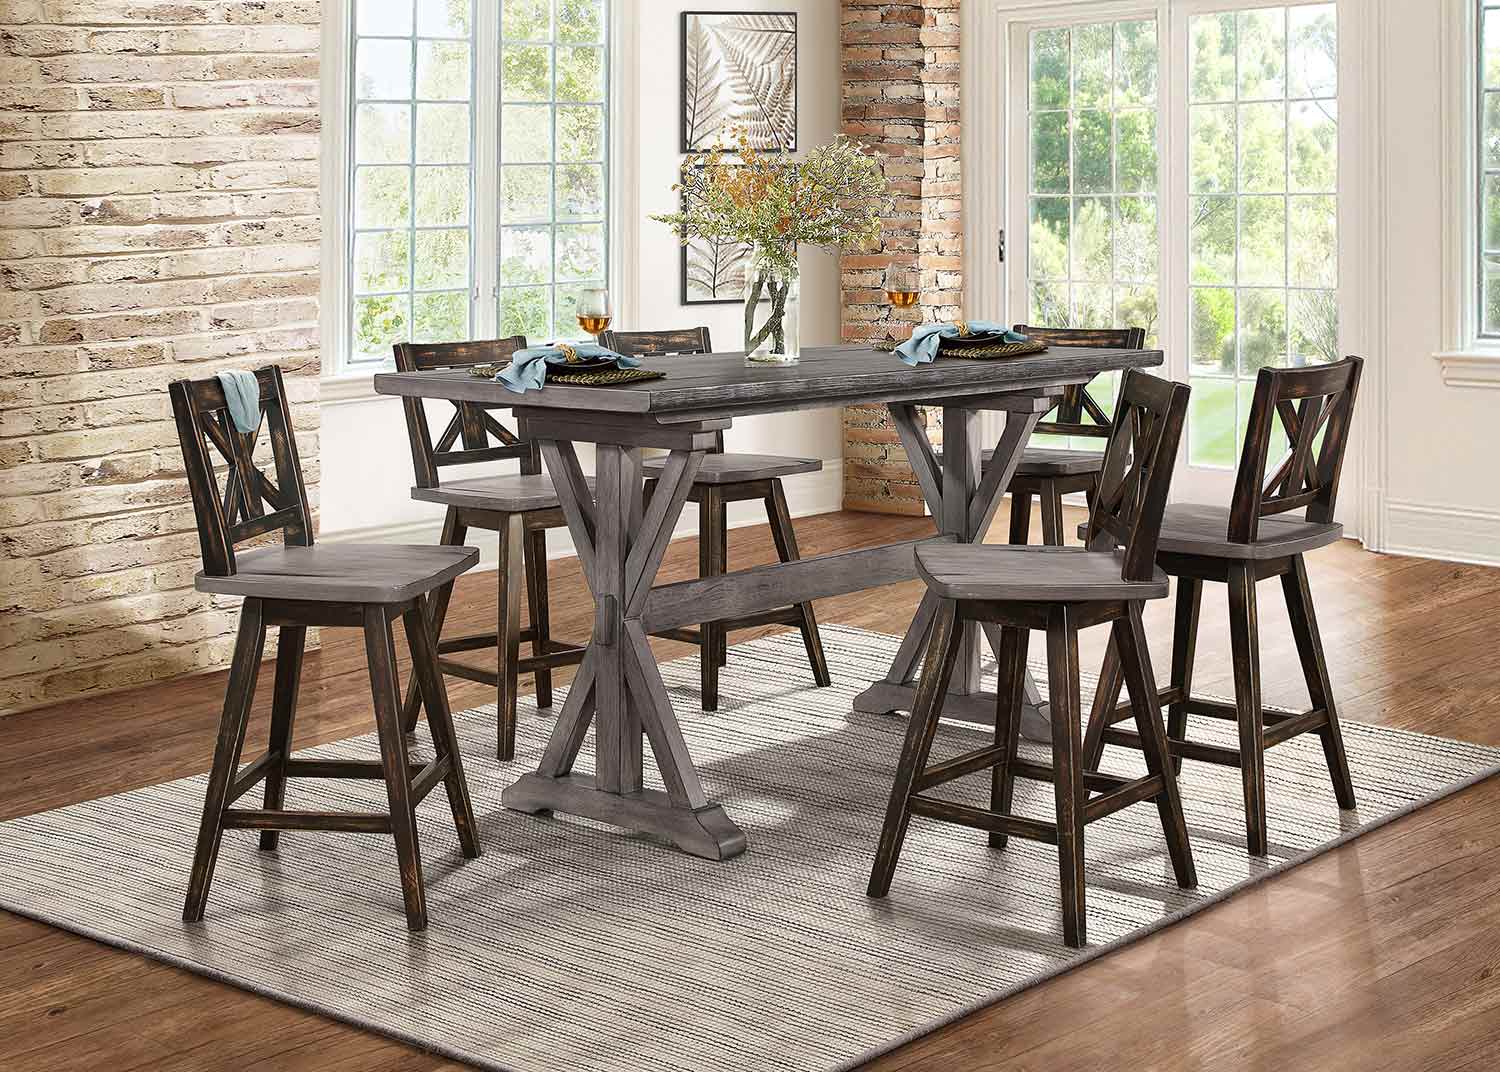 Homelegance Amsonia Counter Height Dining Set - Rustic Gray